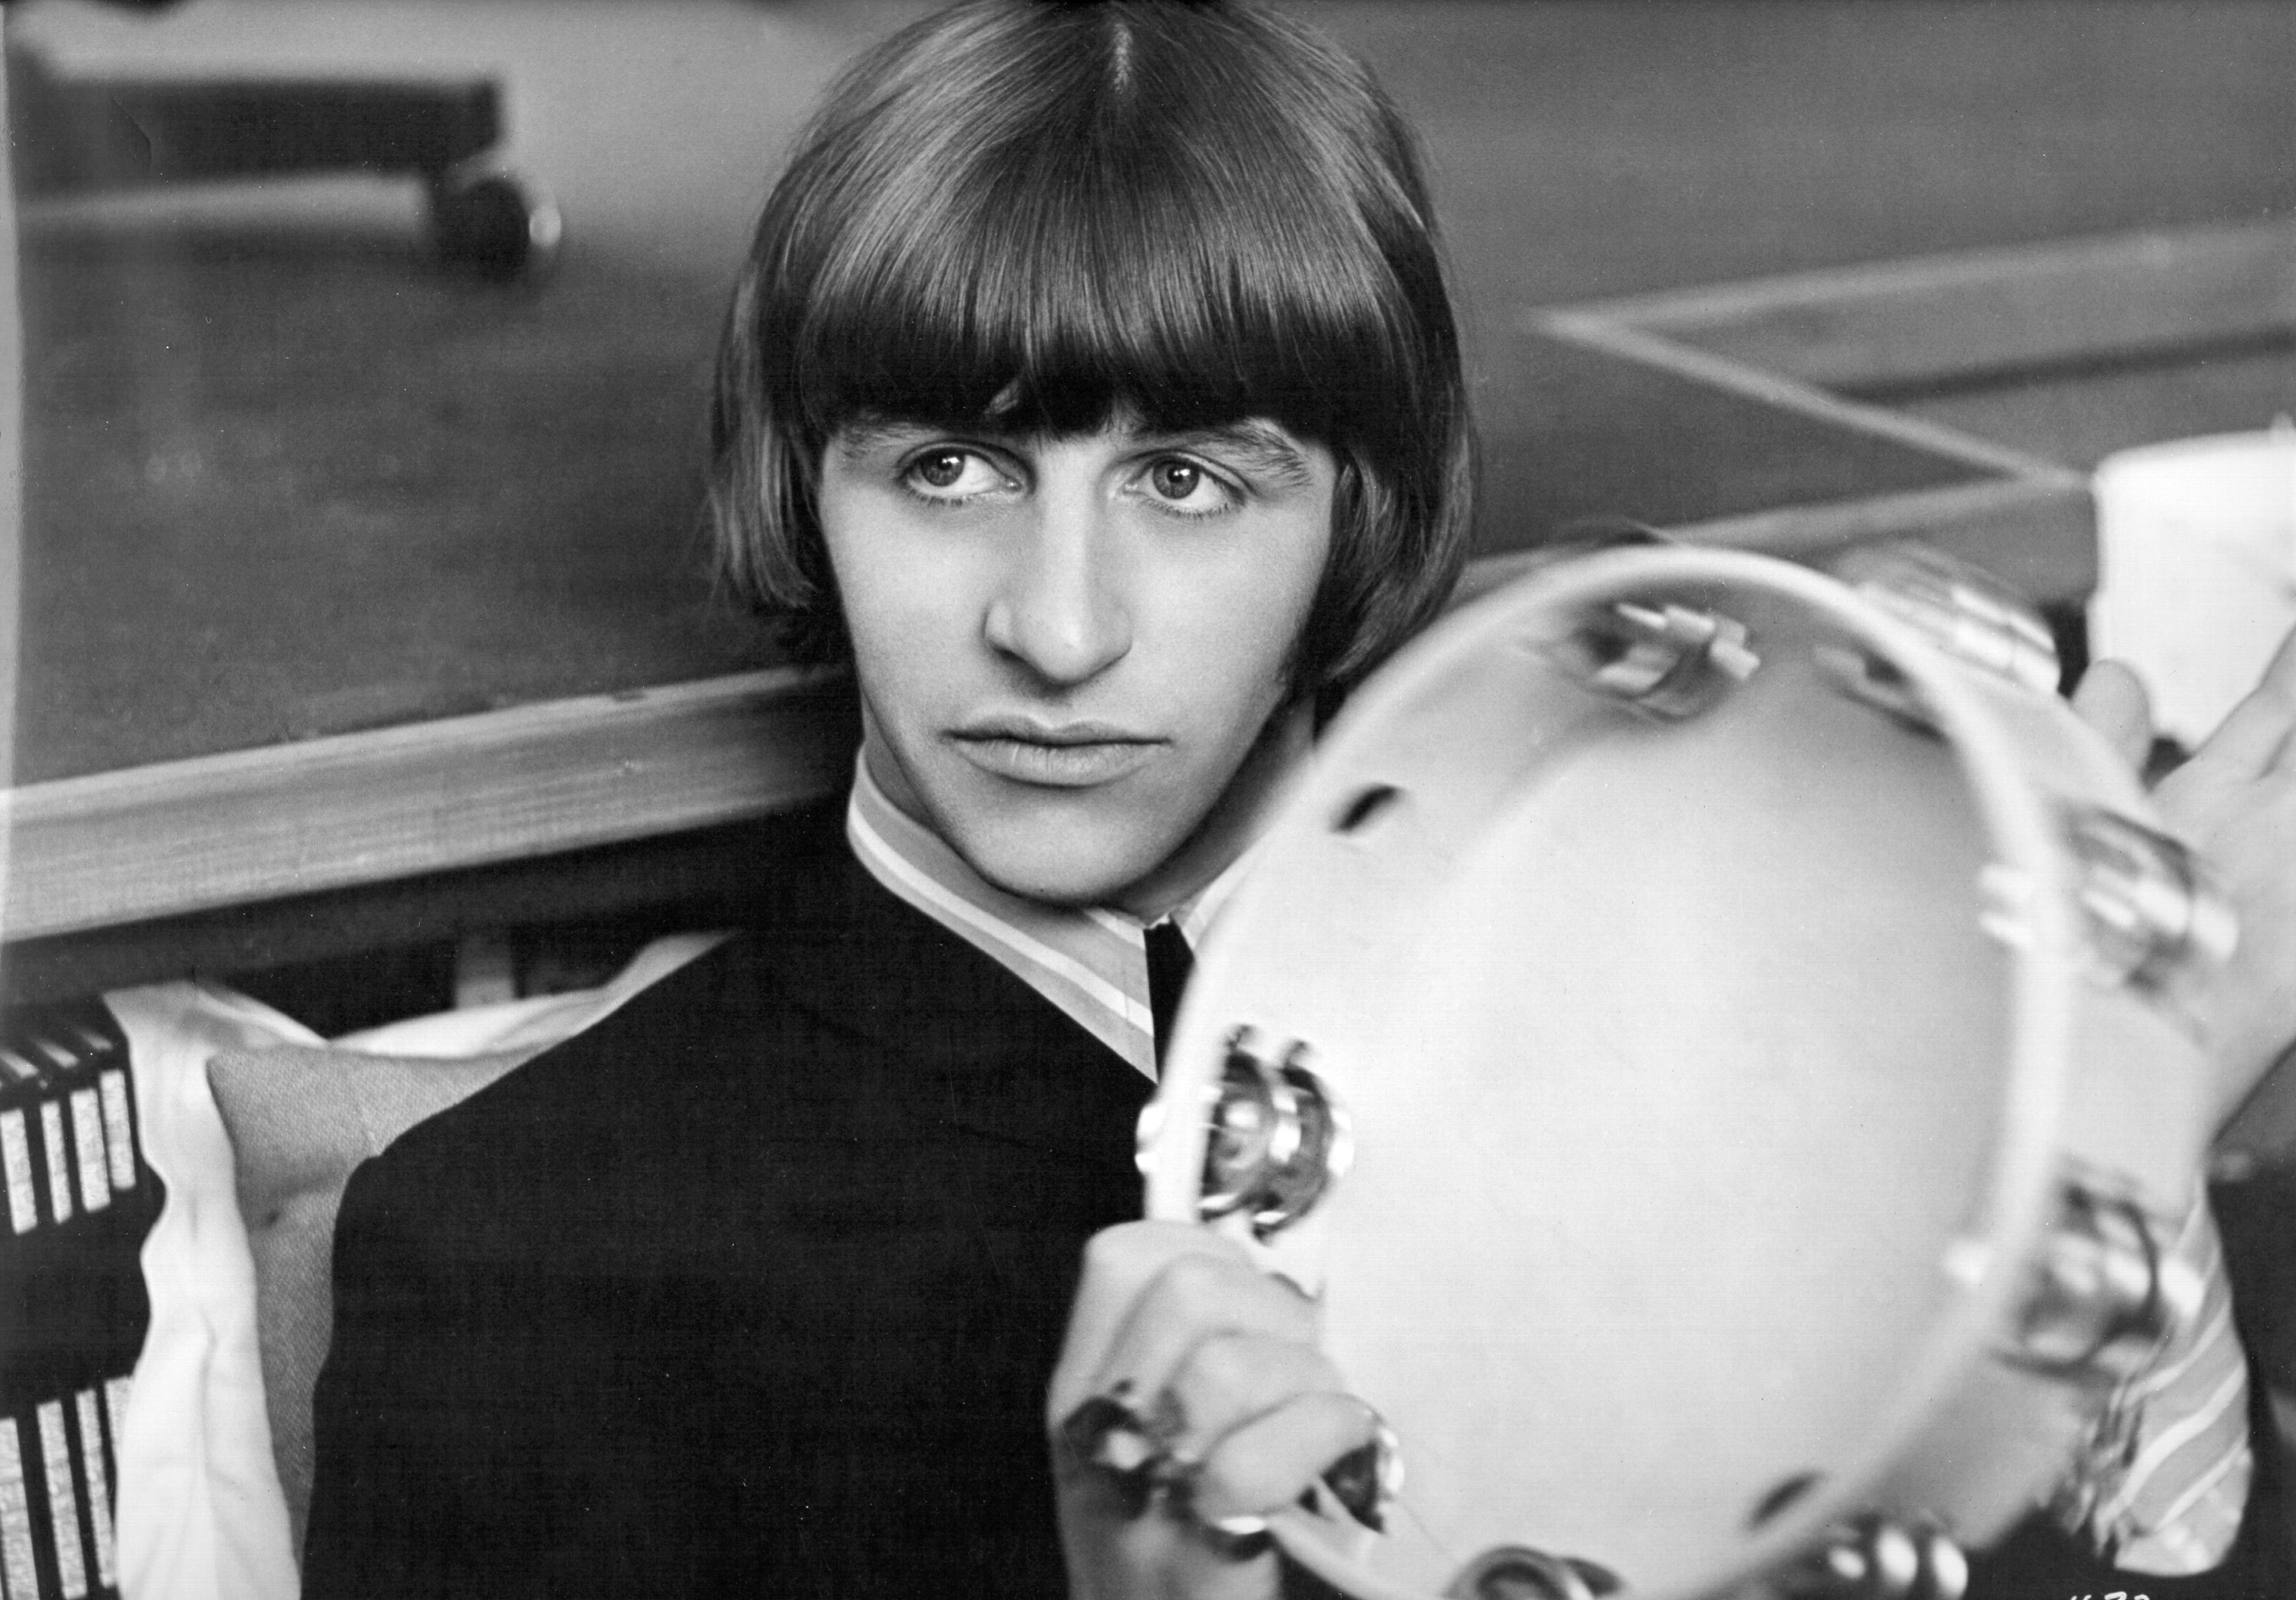 The Beatles' Ringo Starr with a tambourine